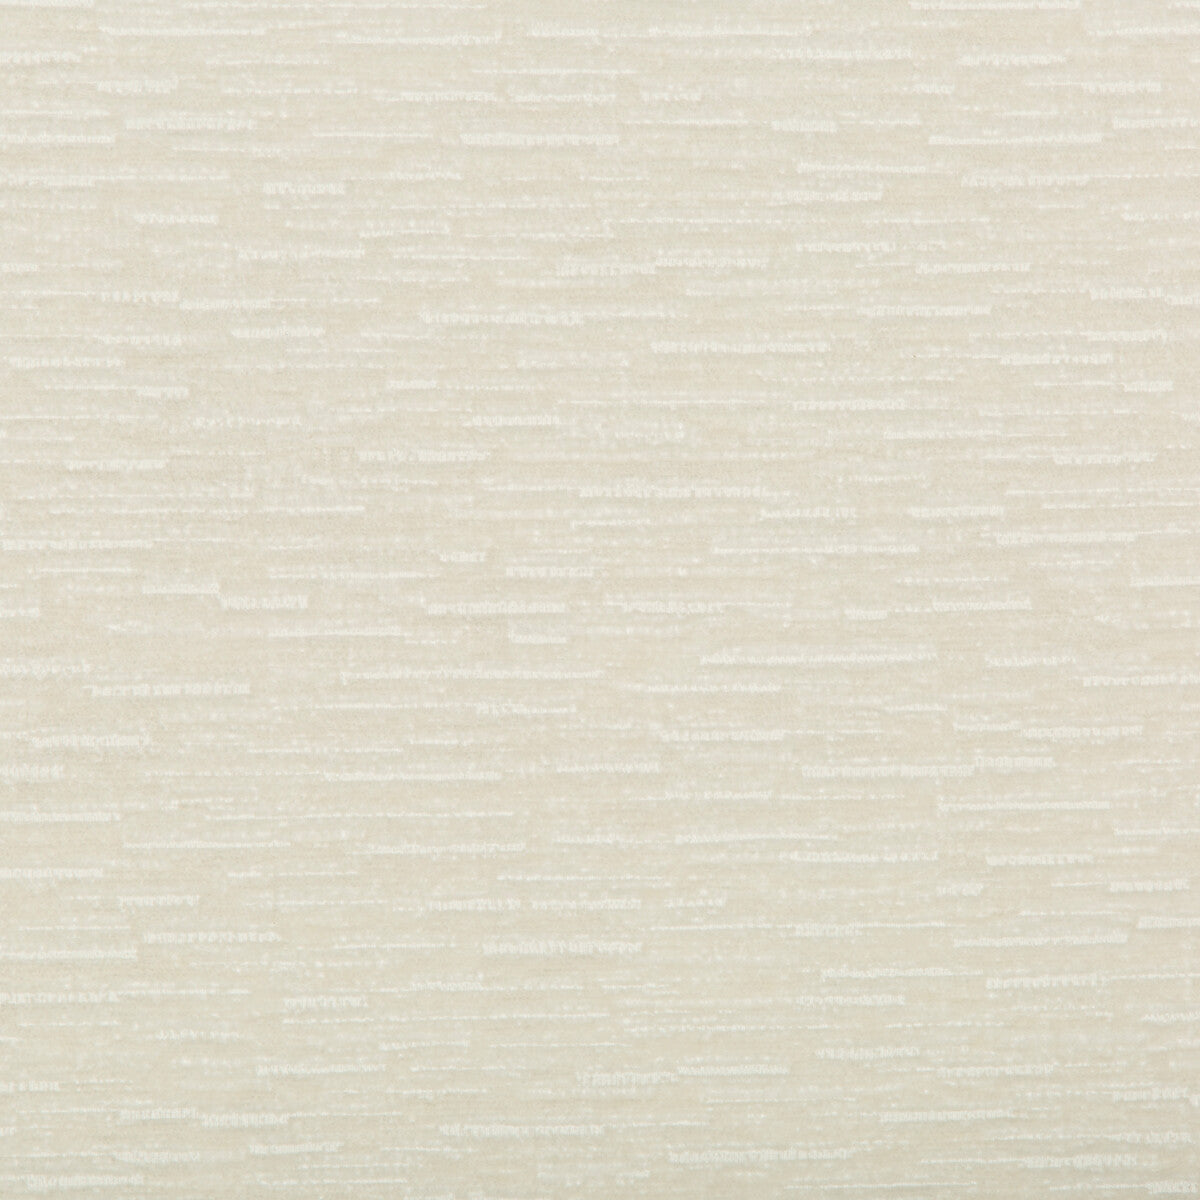 Kravet Smart fabric in 34731-101 color - pattern 34731.101.0 - by Kravet Smart in the Performance collection